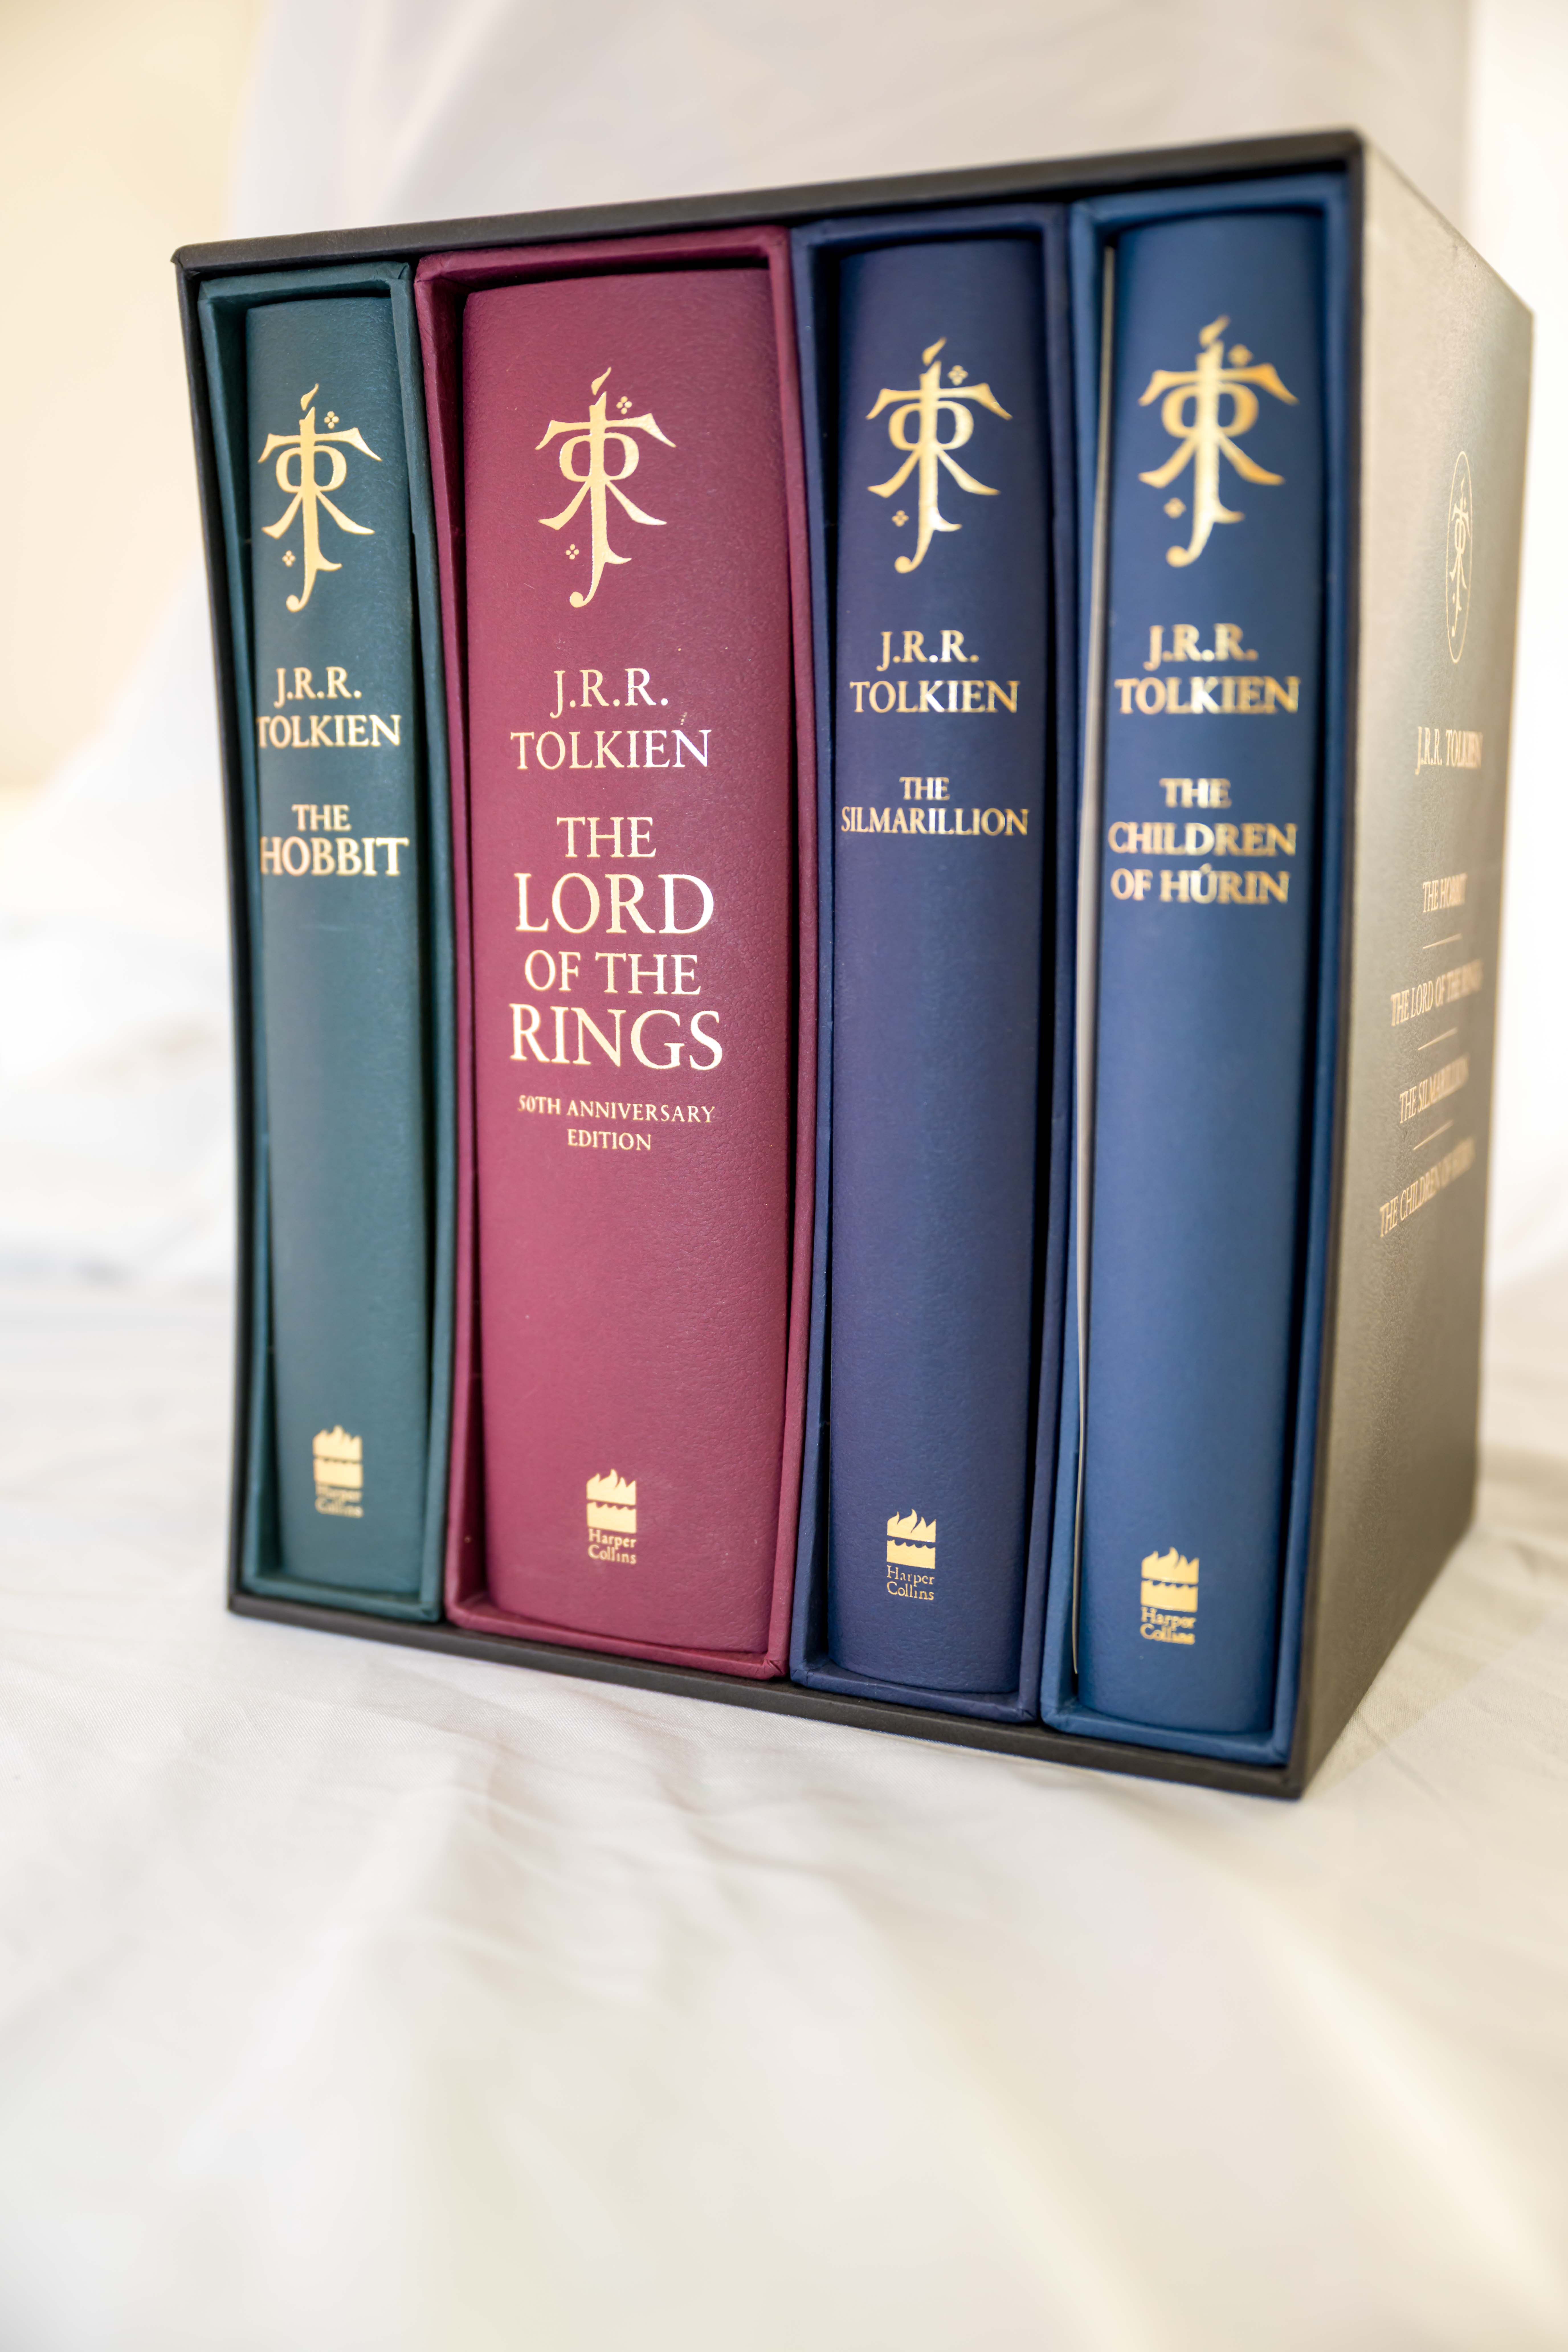 The J.R.R. Tolkien Deluxe Edition Collection in Original Publishers Slipcase, Limited to 500 Sets